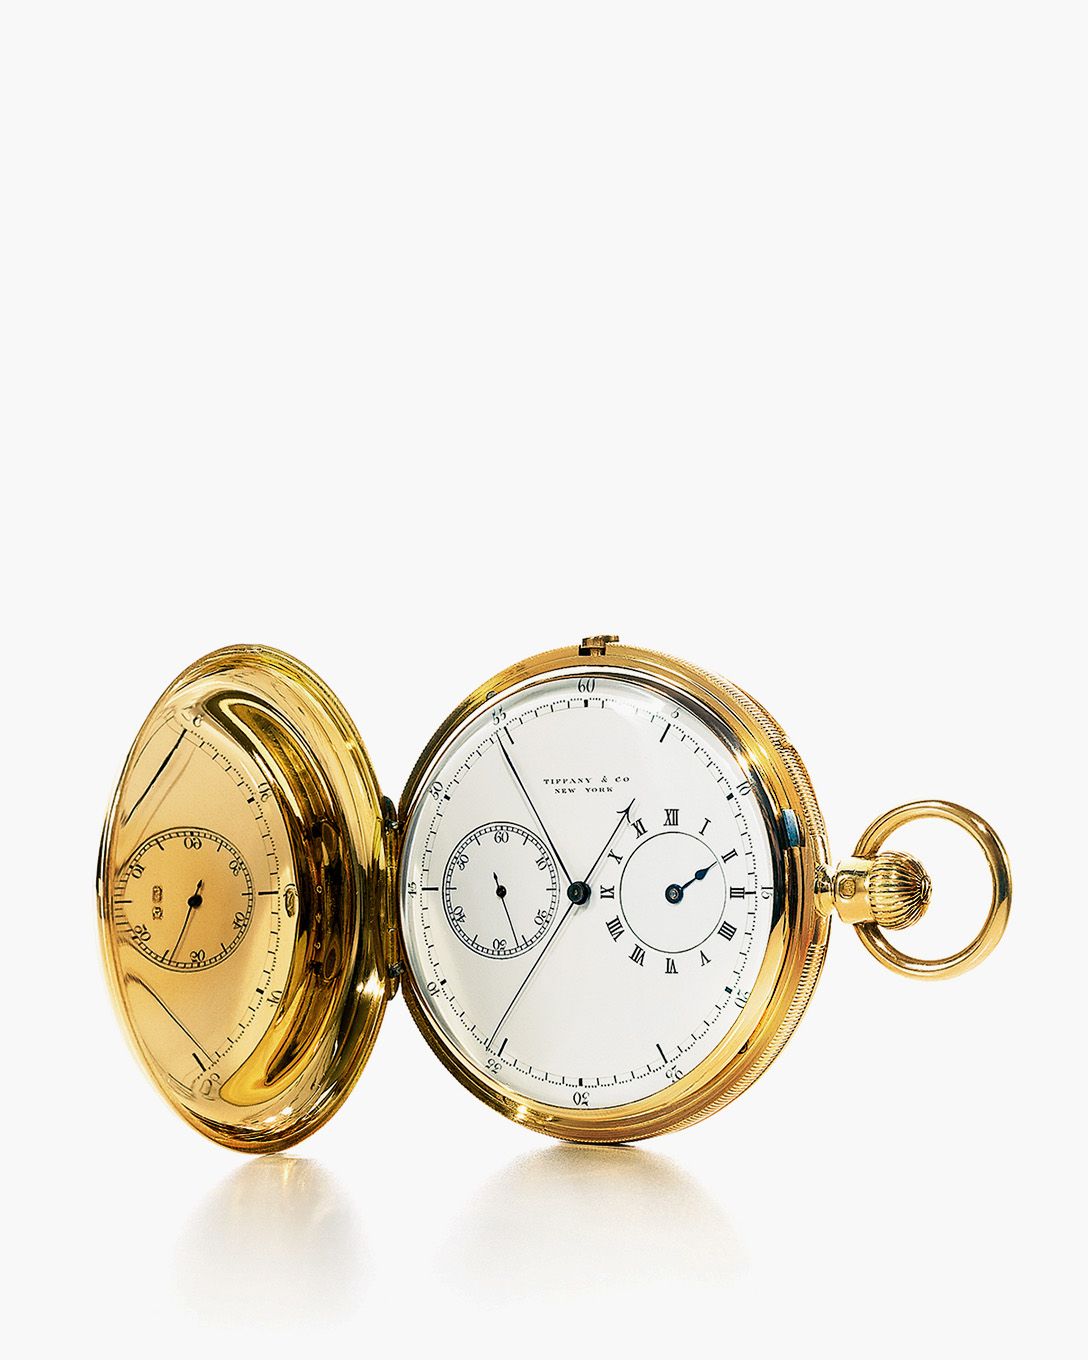 Tiffany & Co. on X: In 1847, Tiffany began selling watches